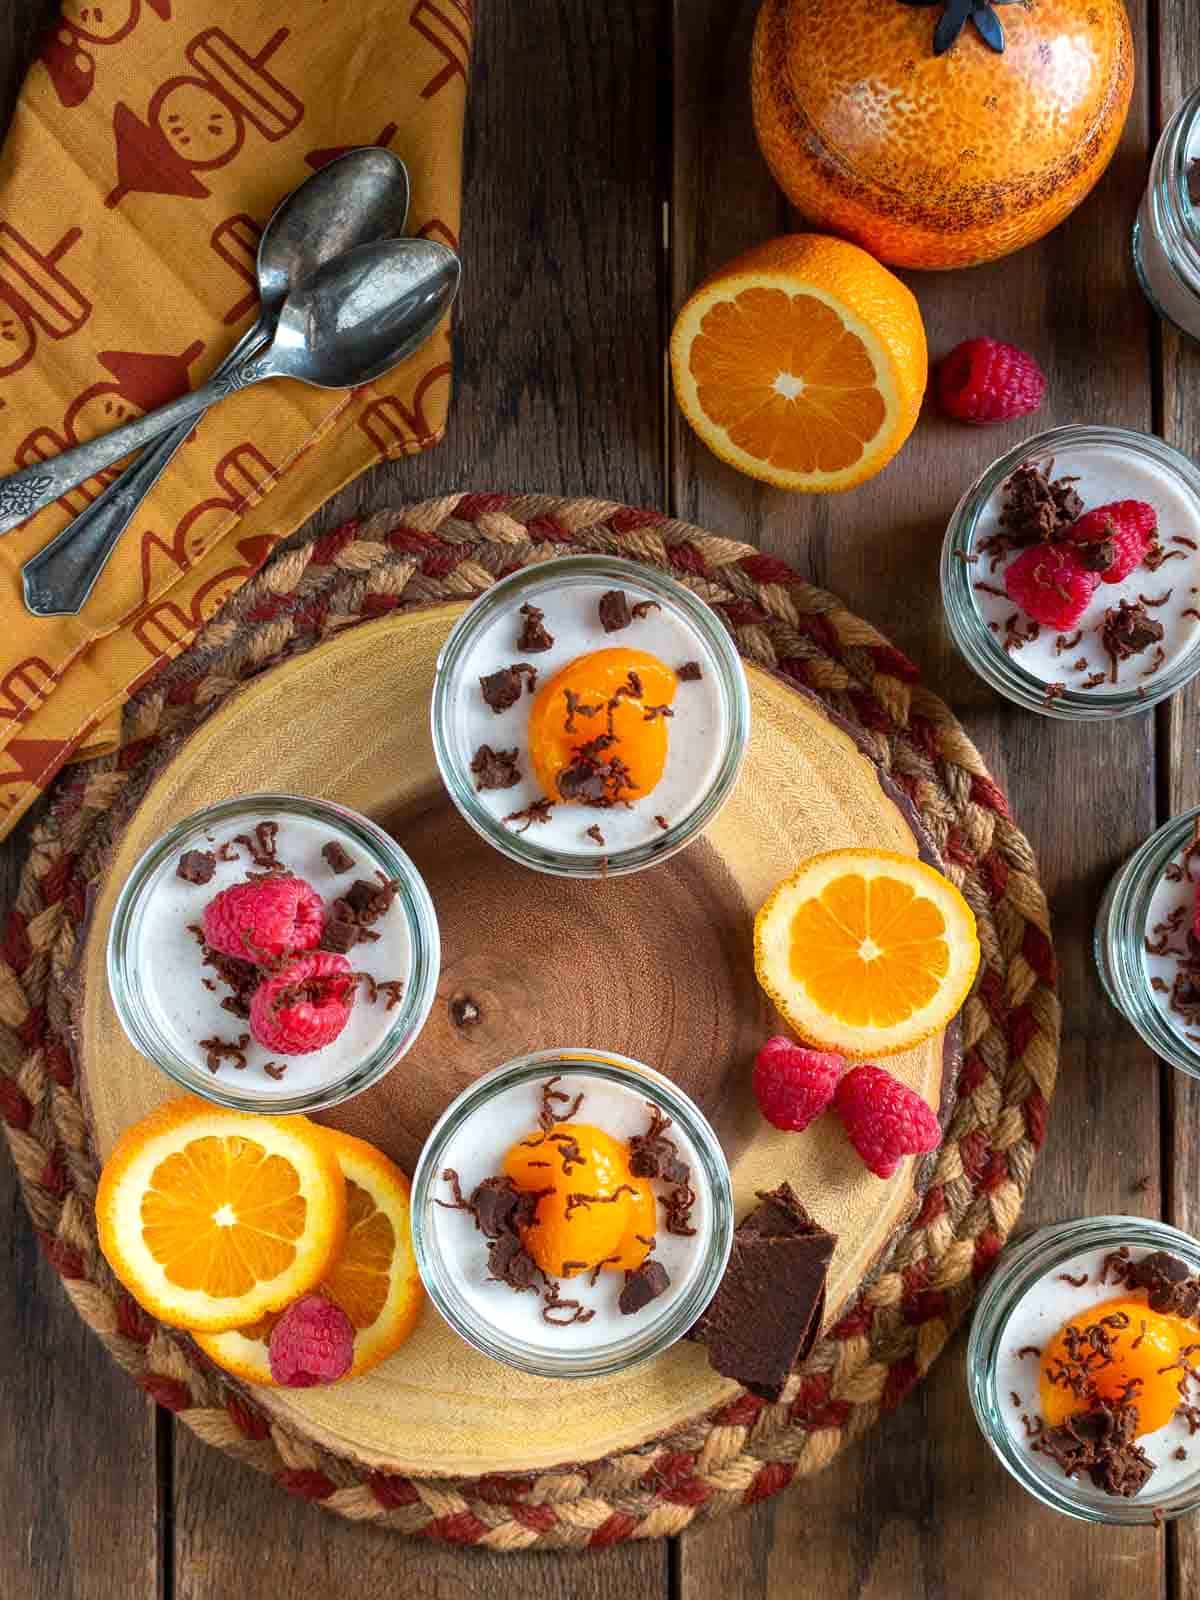 Chai spiced coconut jelly on a wooden board garnished with mandarin oranges, raspberries and dark chocolate.